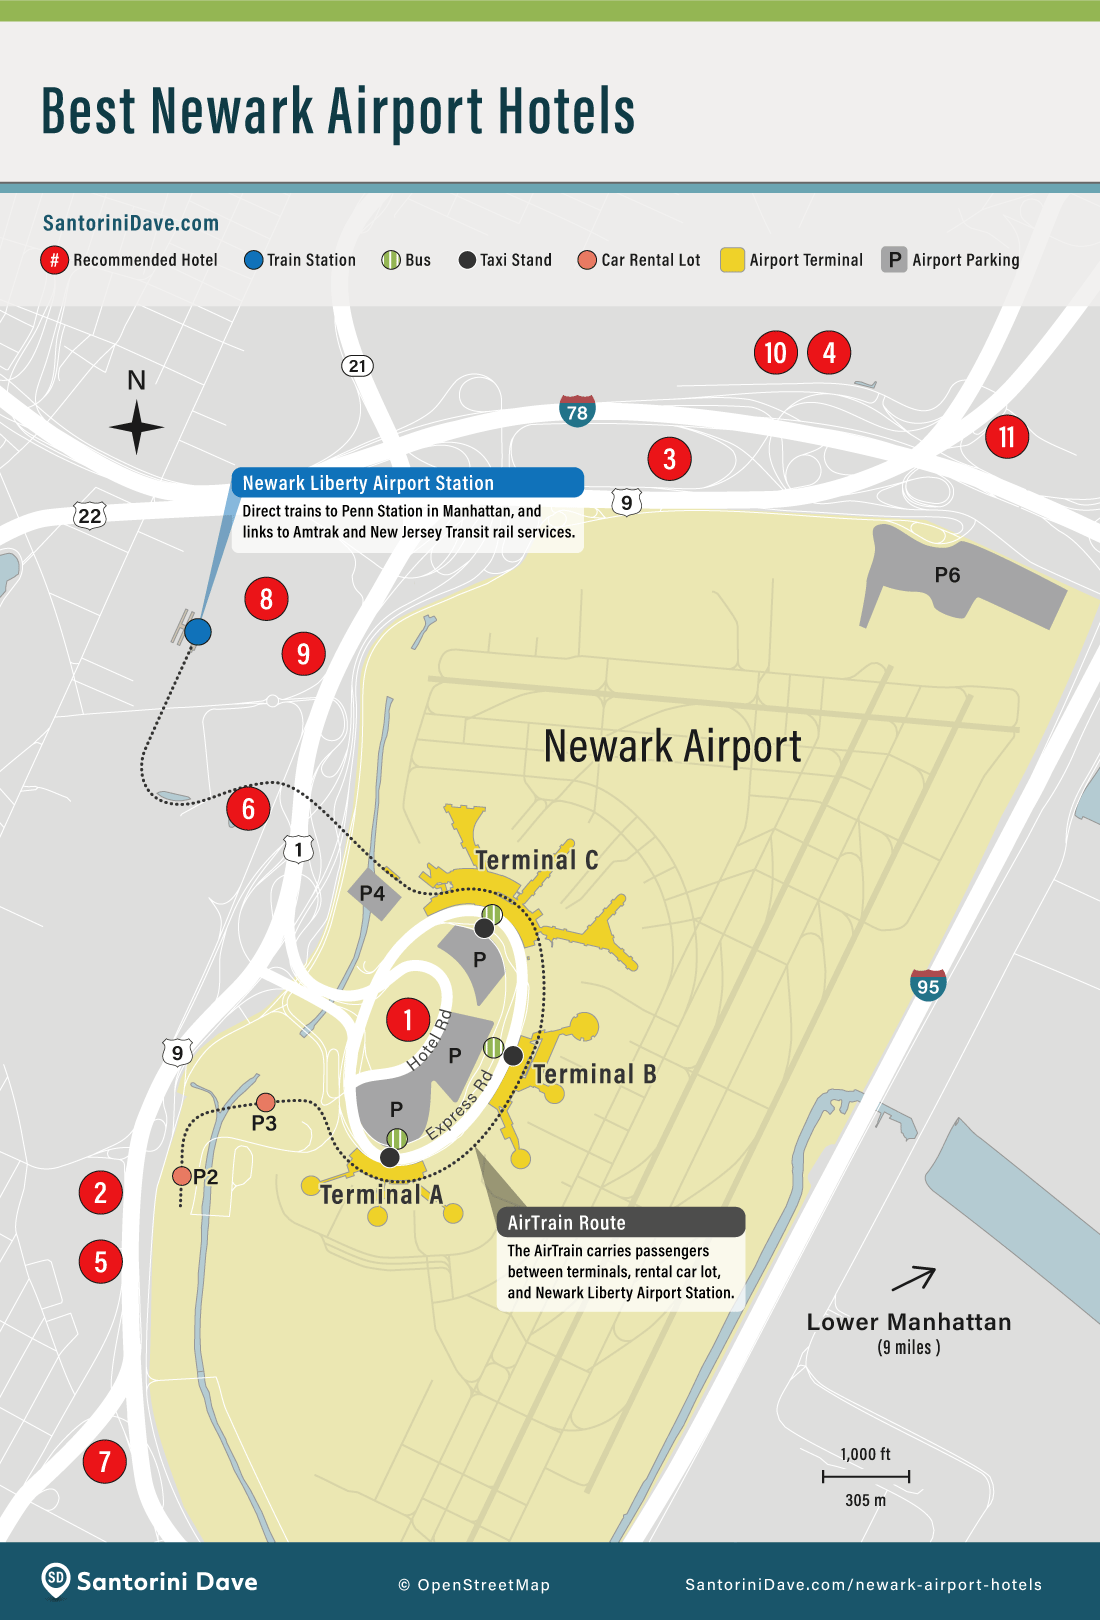 Map of Newark Airport hotels.